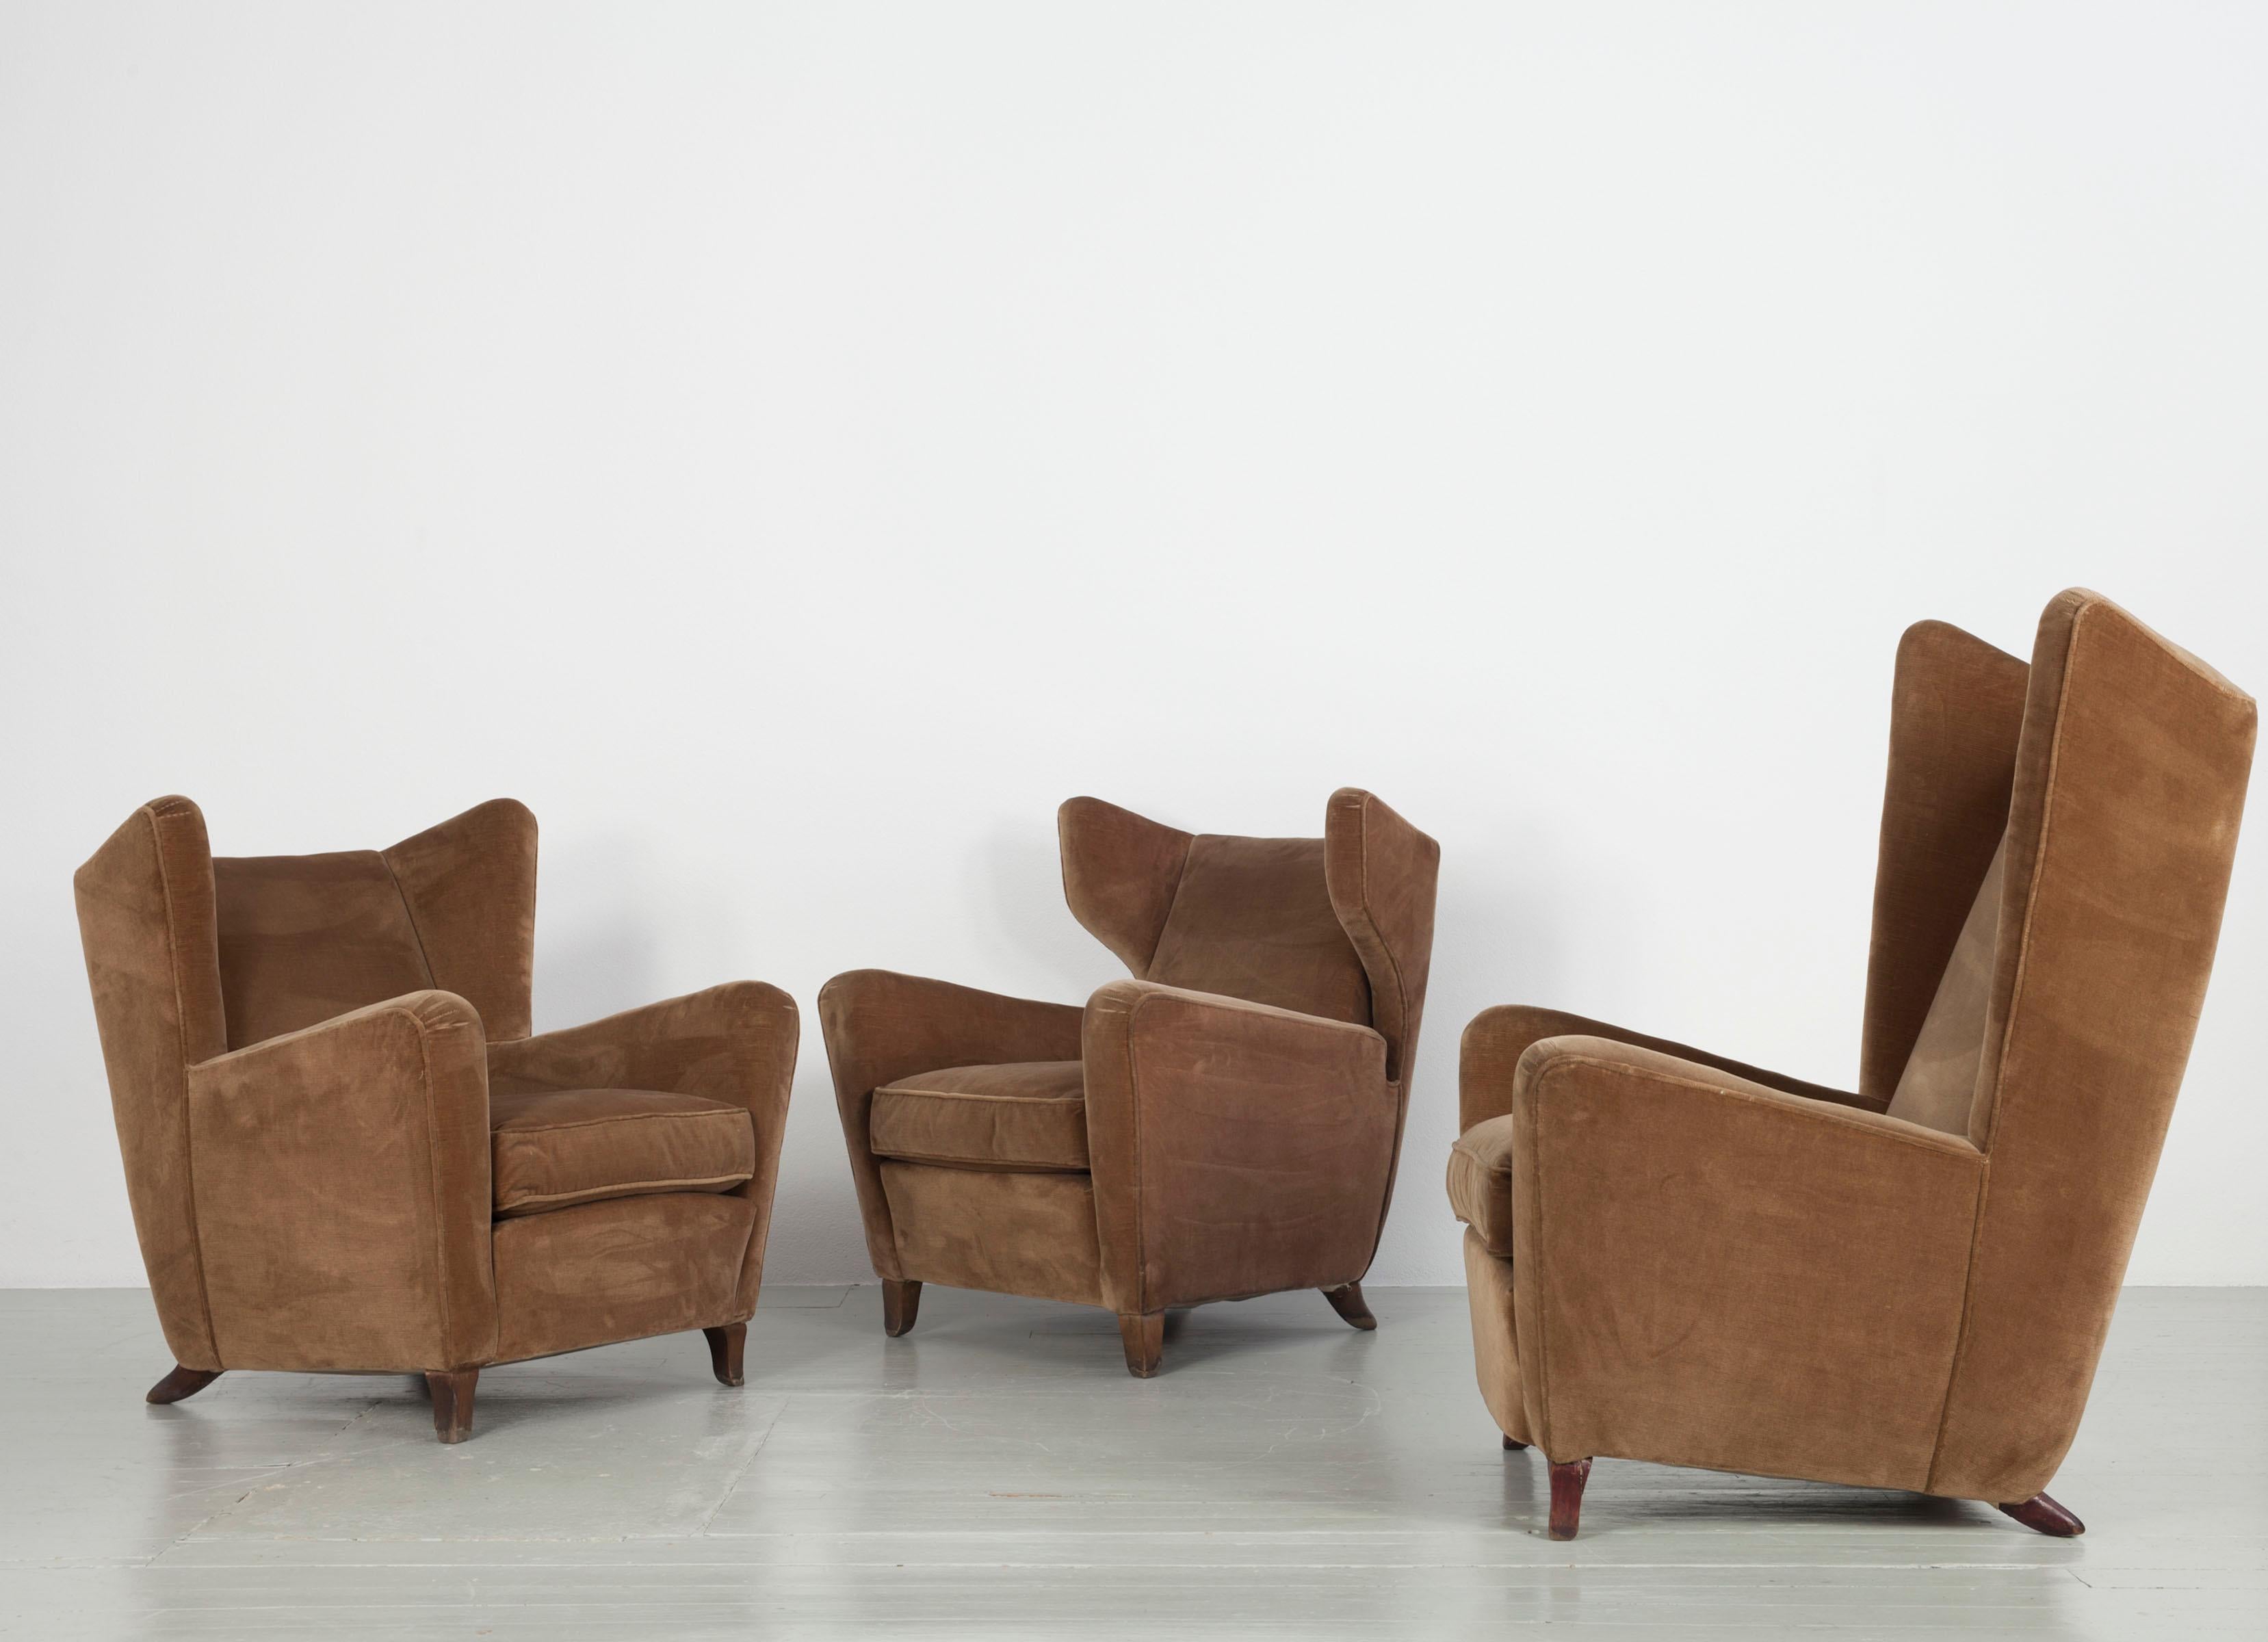 Set of Three Velvet Armchair, Melchiorre Bega Attributed, Italy, 1950s For Sale 13